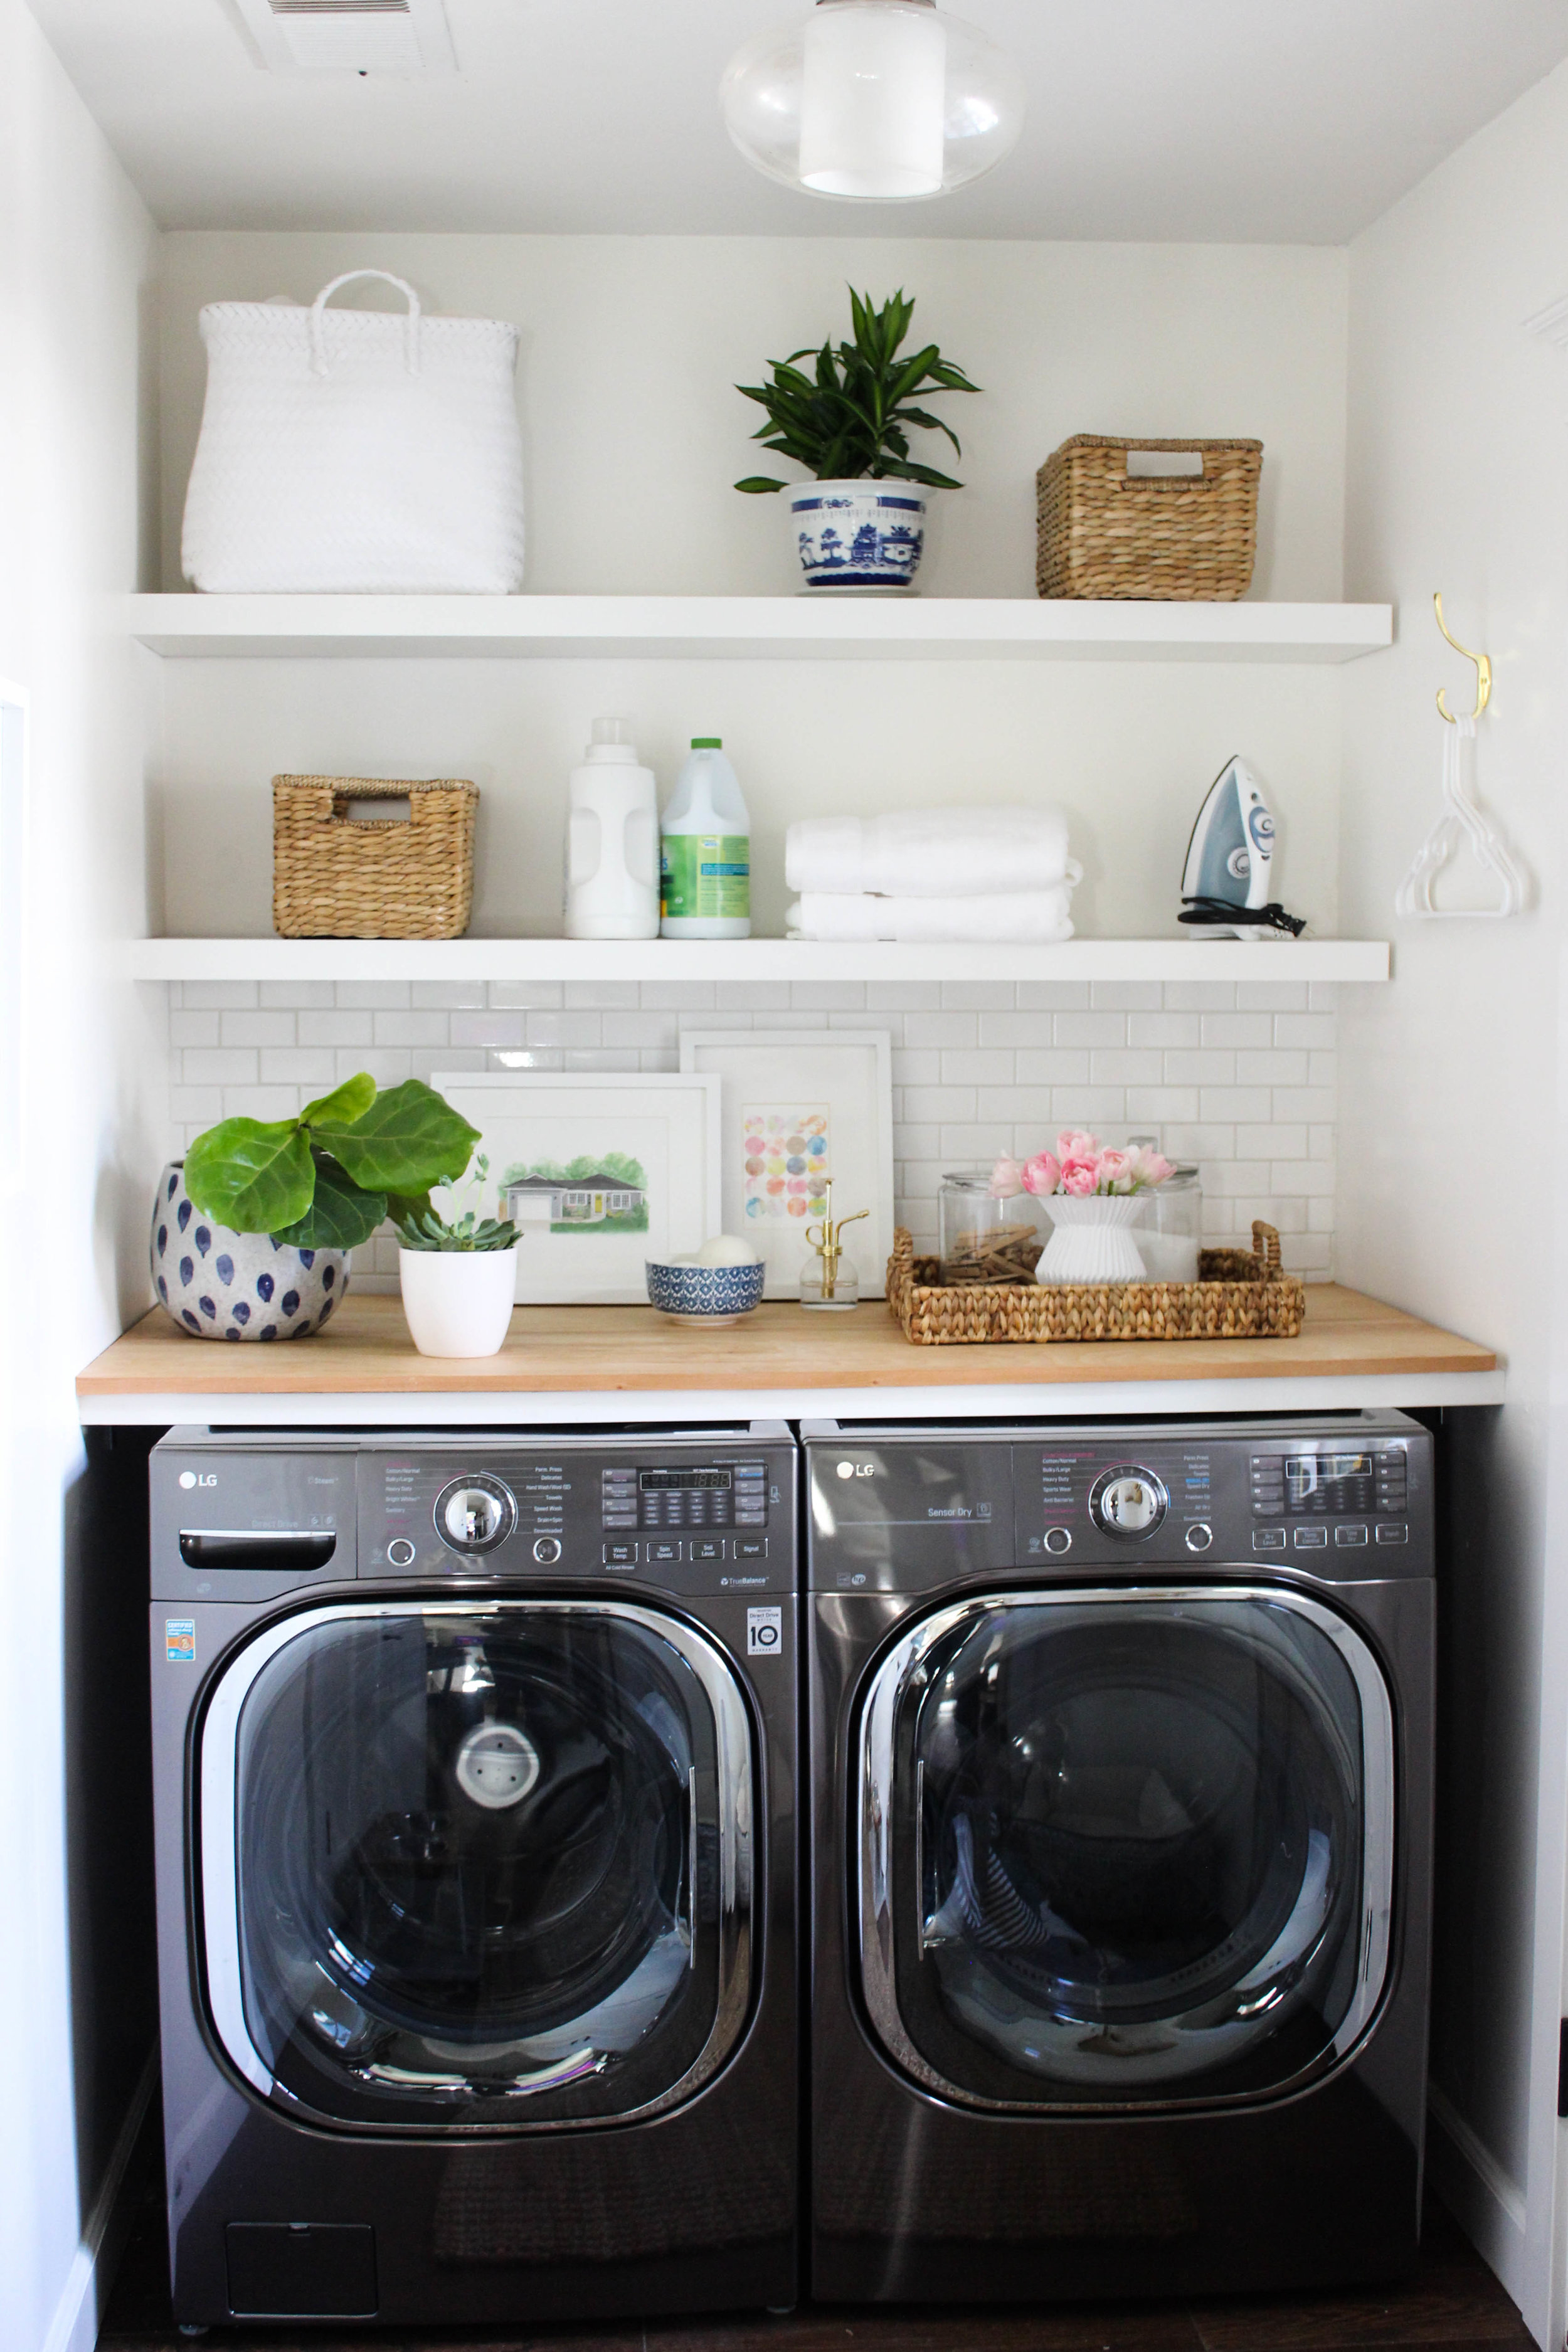 HOW TO: LAUNDRY FOR A SMALL HOME